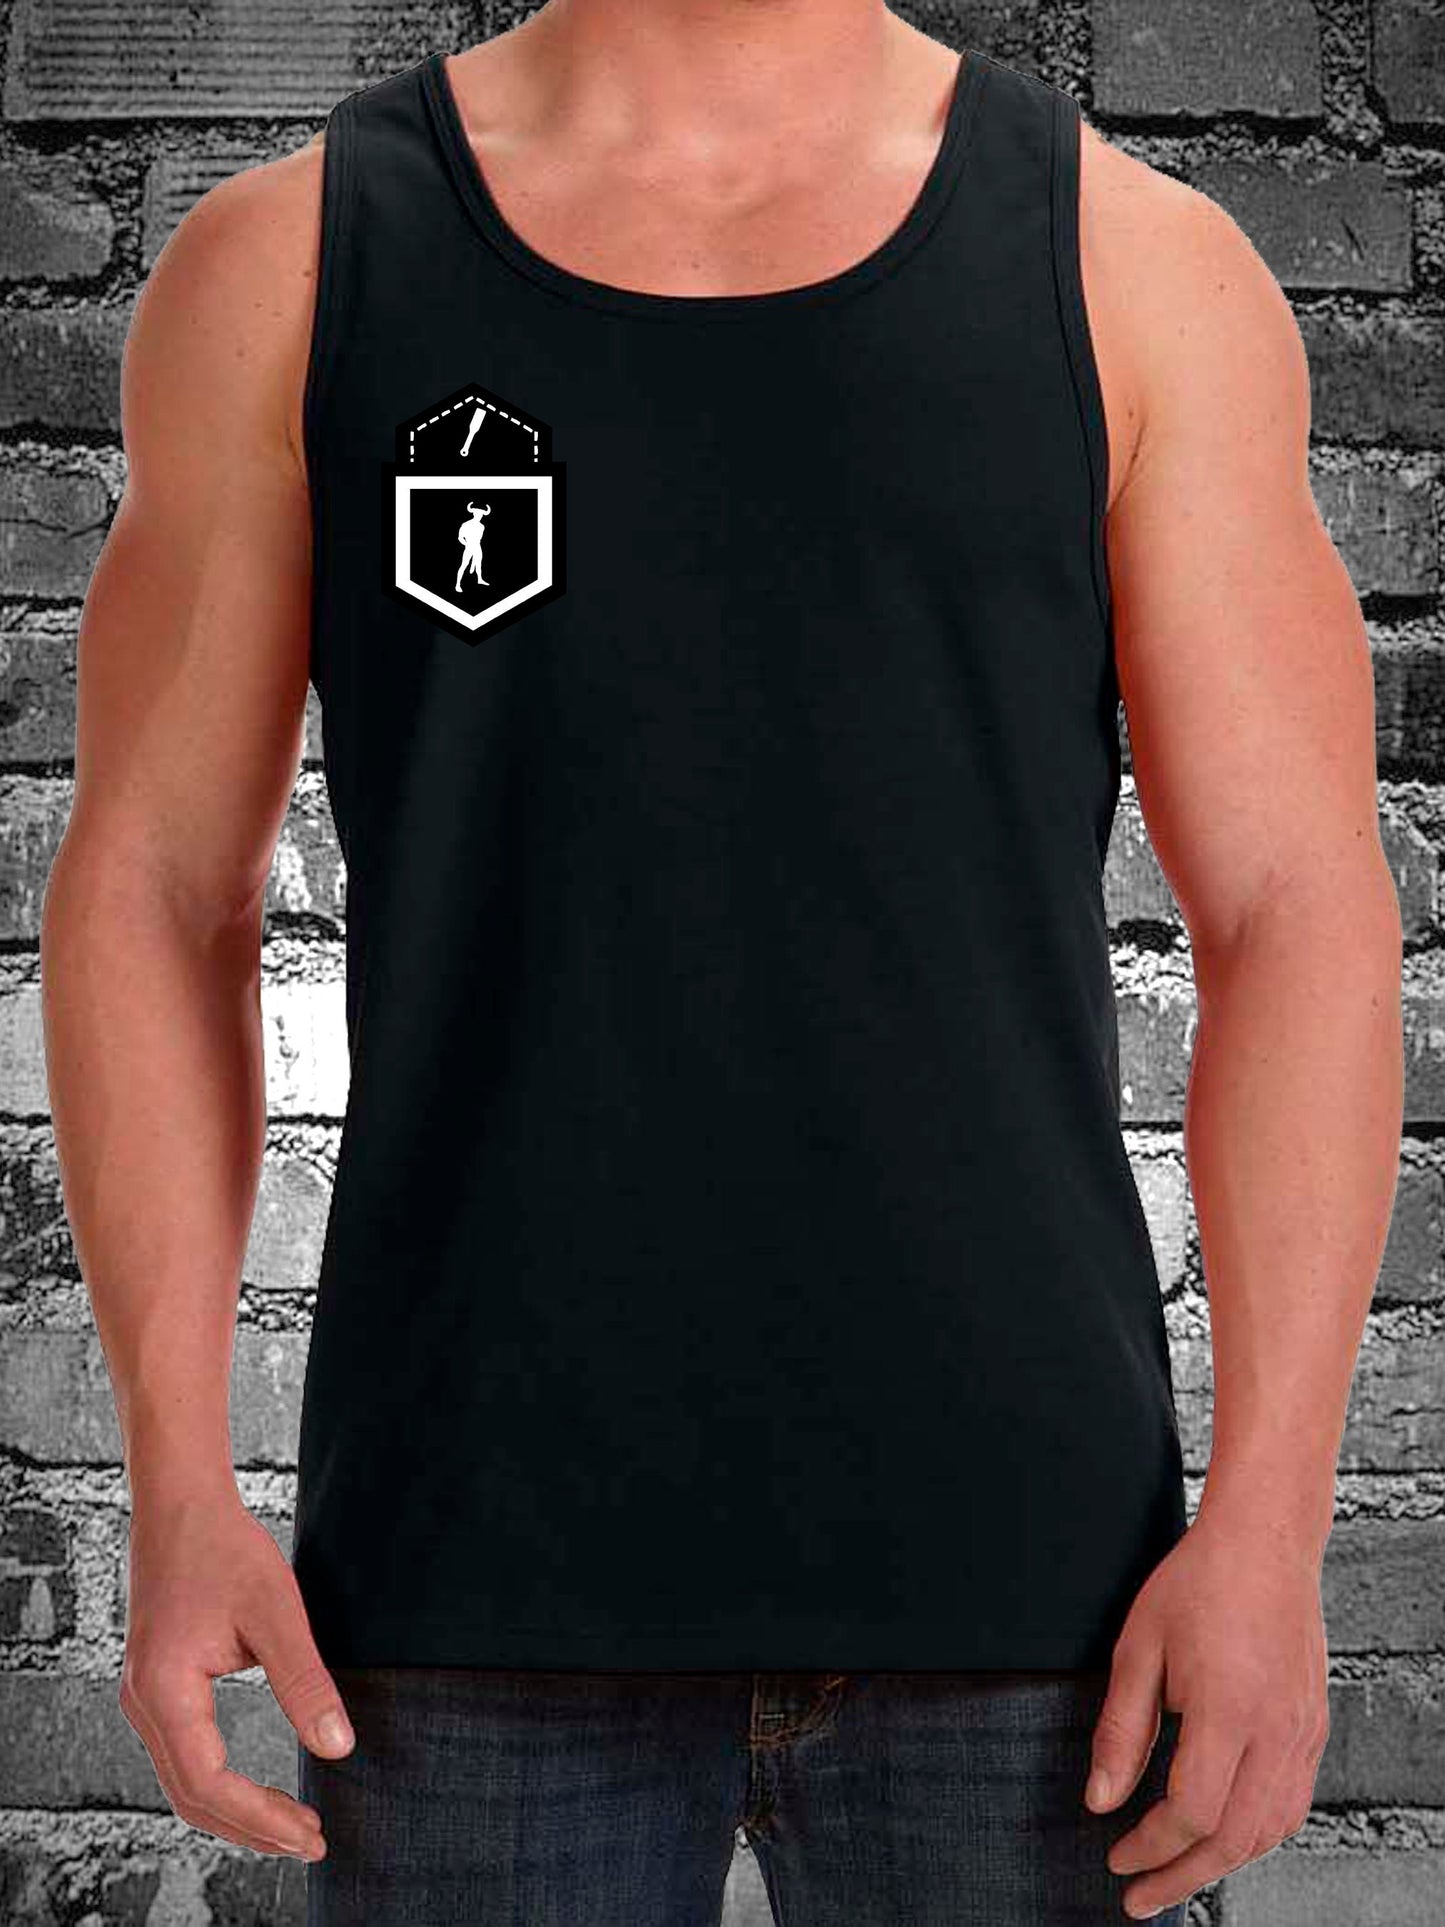 HANKY CODES Right / Gay Fetish Black Tank Top with Fake Pocket design on RIGHT side